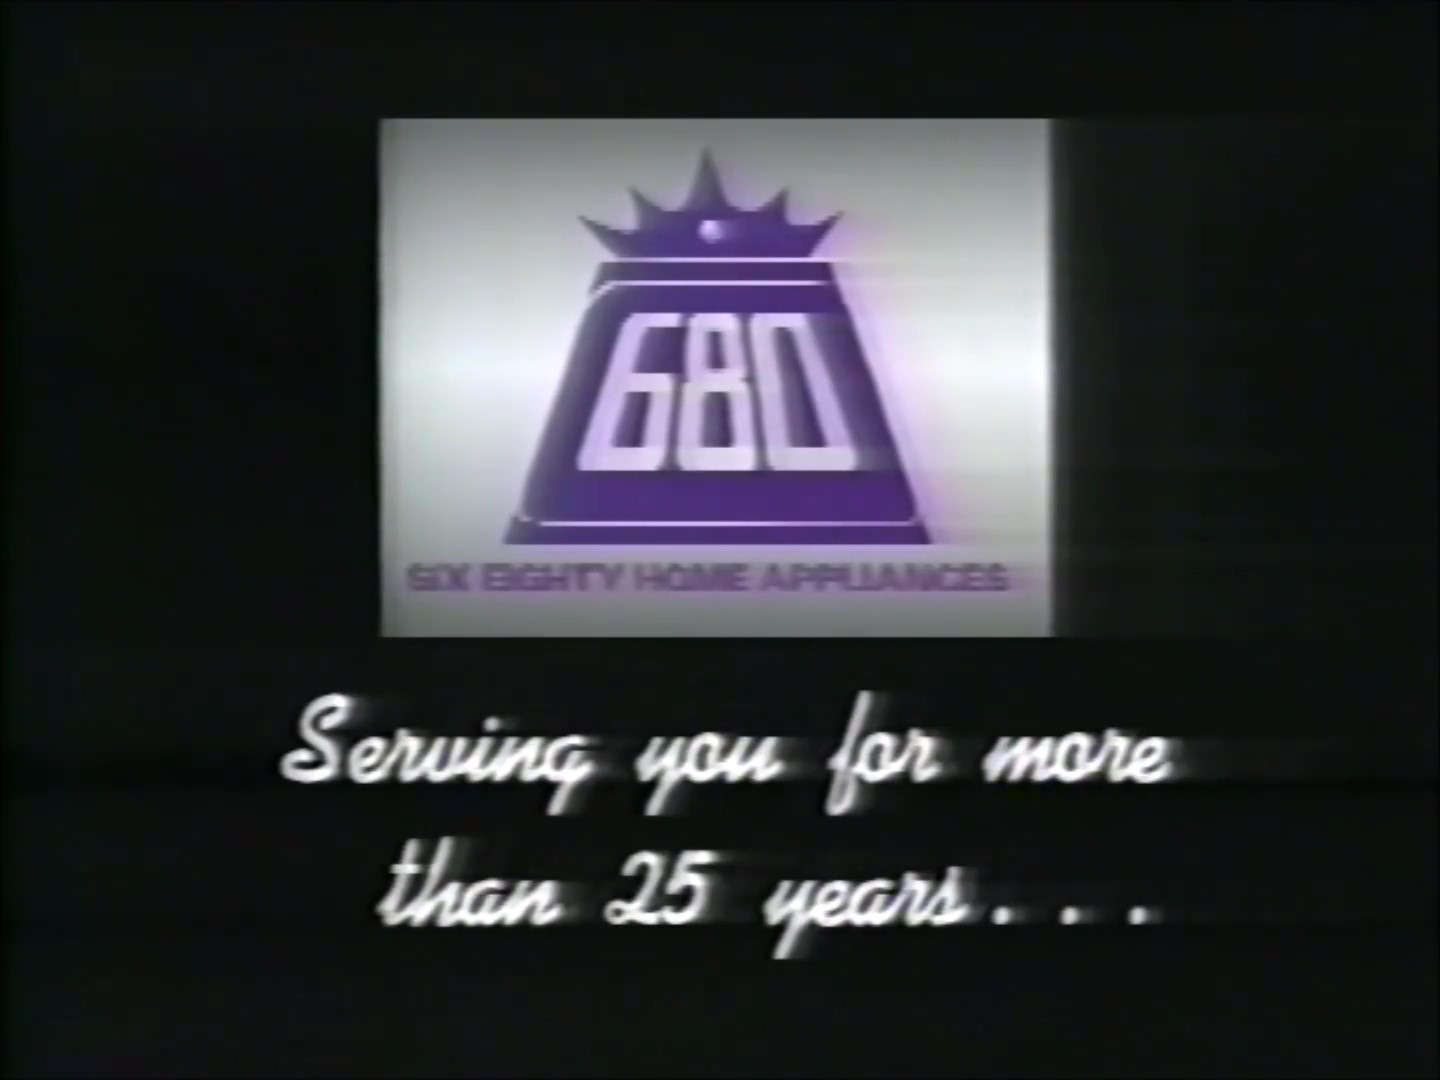 680 Home Appliances - 680 Home Appliances (found Filipino appliance store commercial; 1991-2000)